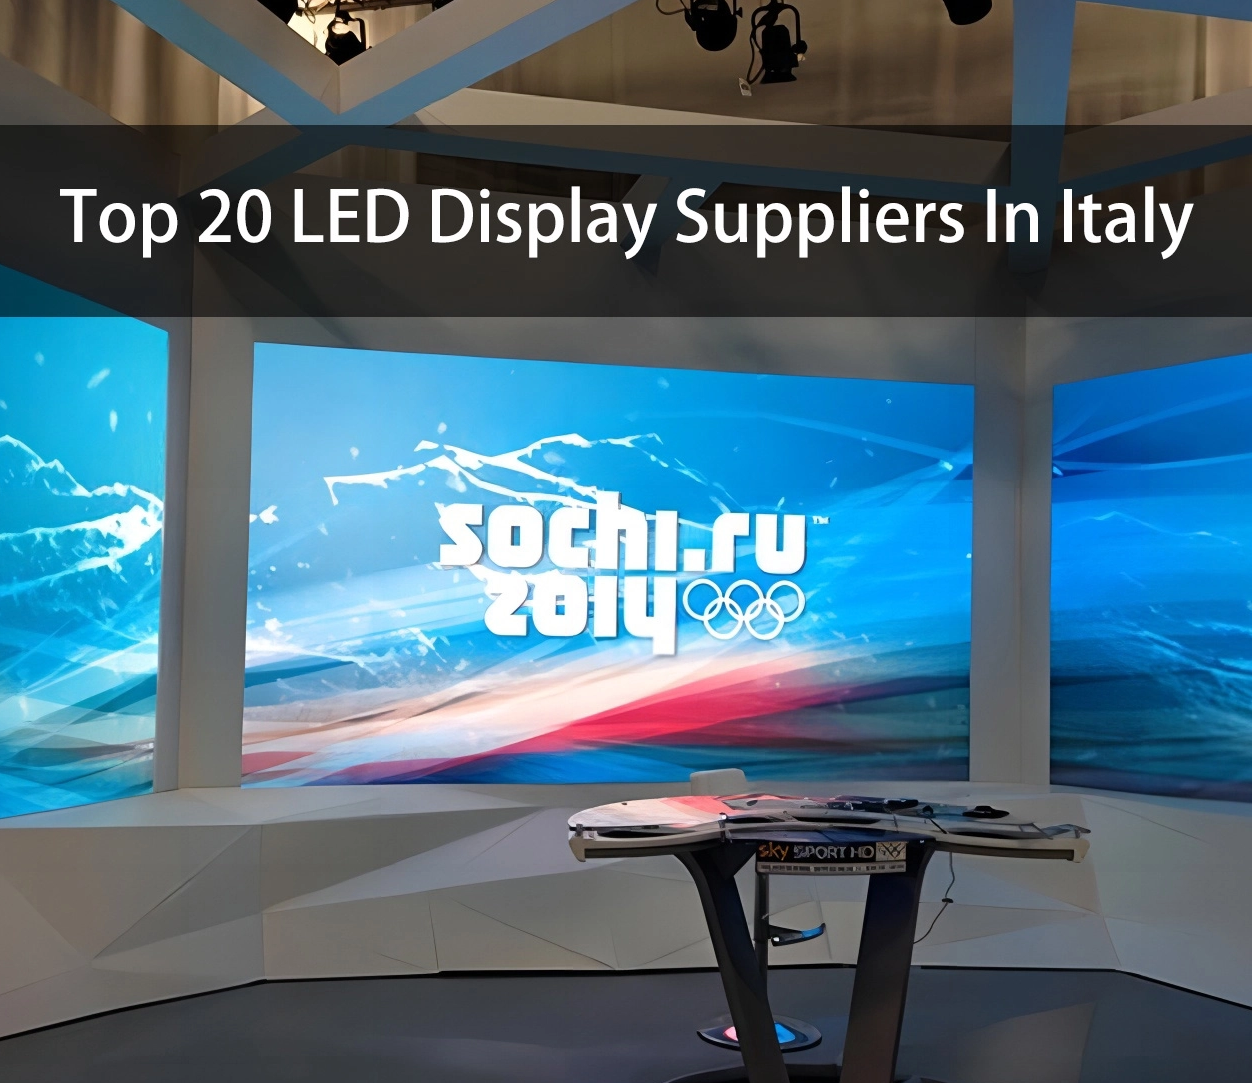 Top 20 LED Display Suppliers In Italy